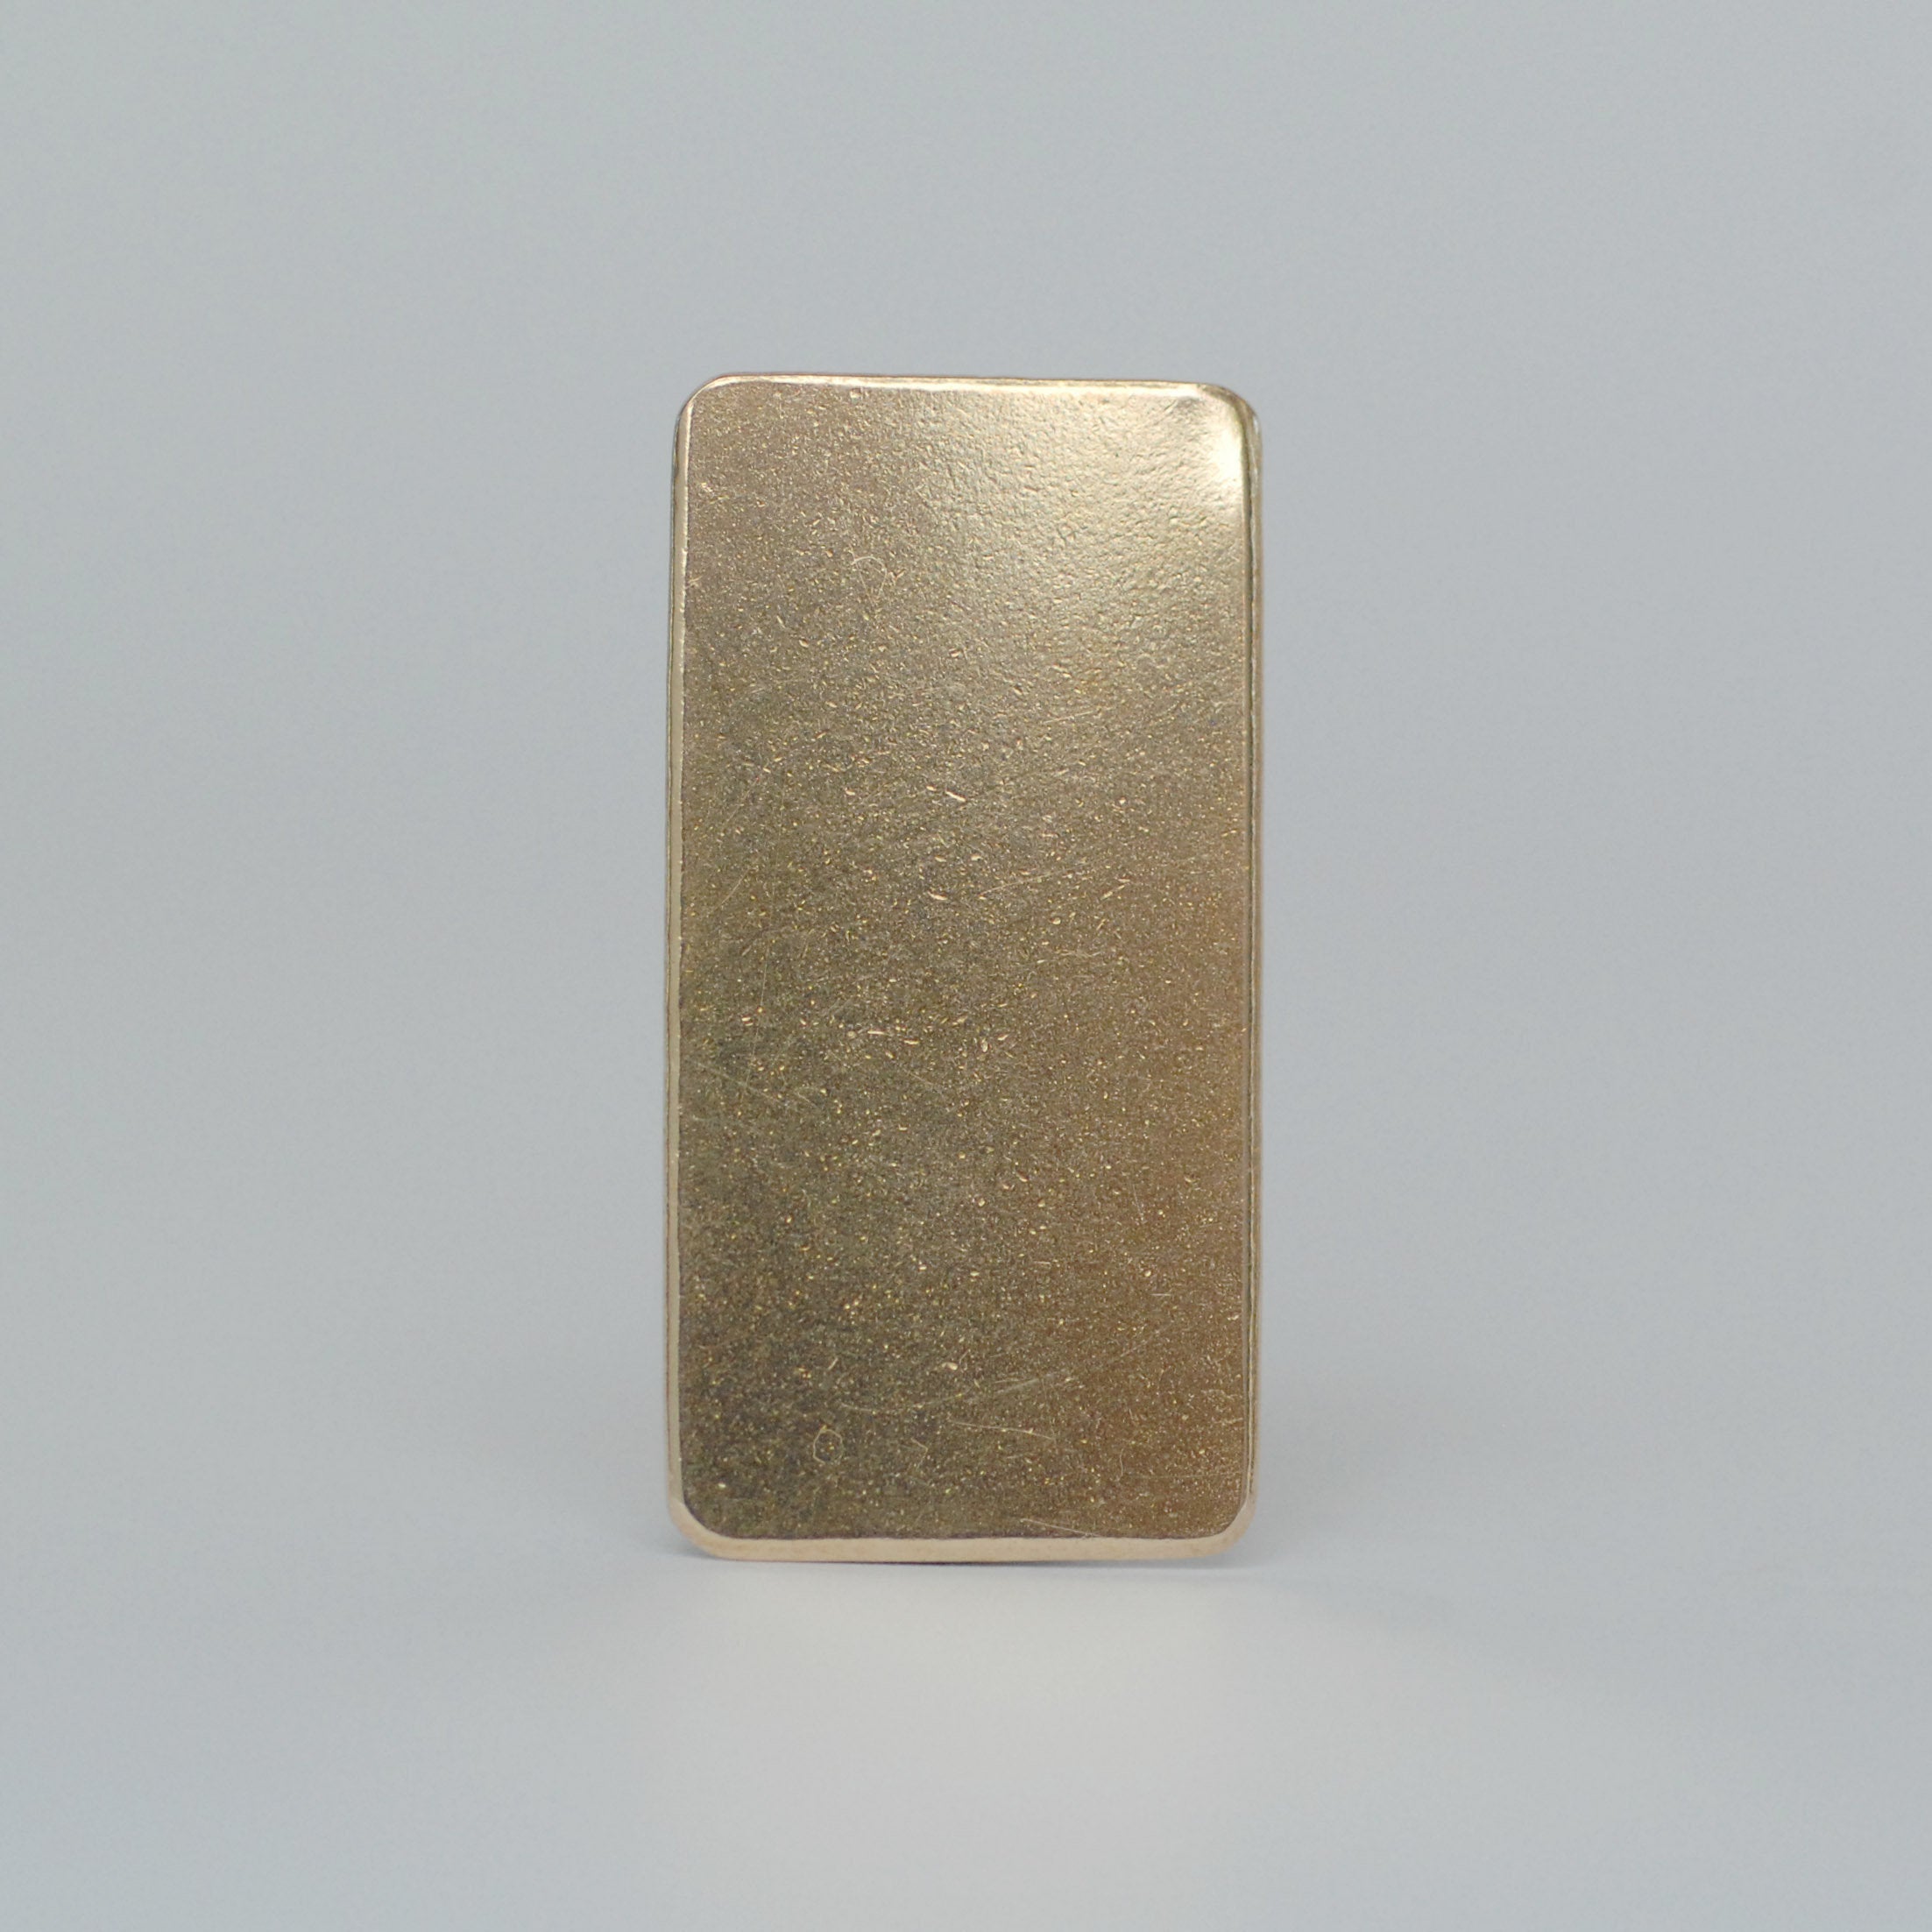 Rectangle shapes 30mm x 15mm 24g 22g 20g metal blanks for making jewelry, copper, brass, bronze, nickel silver